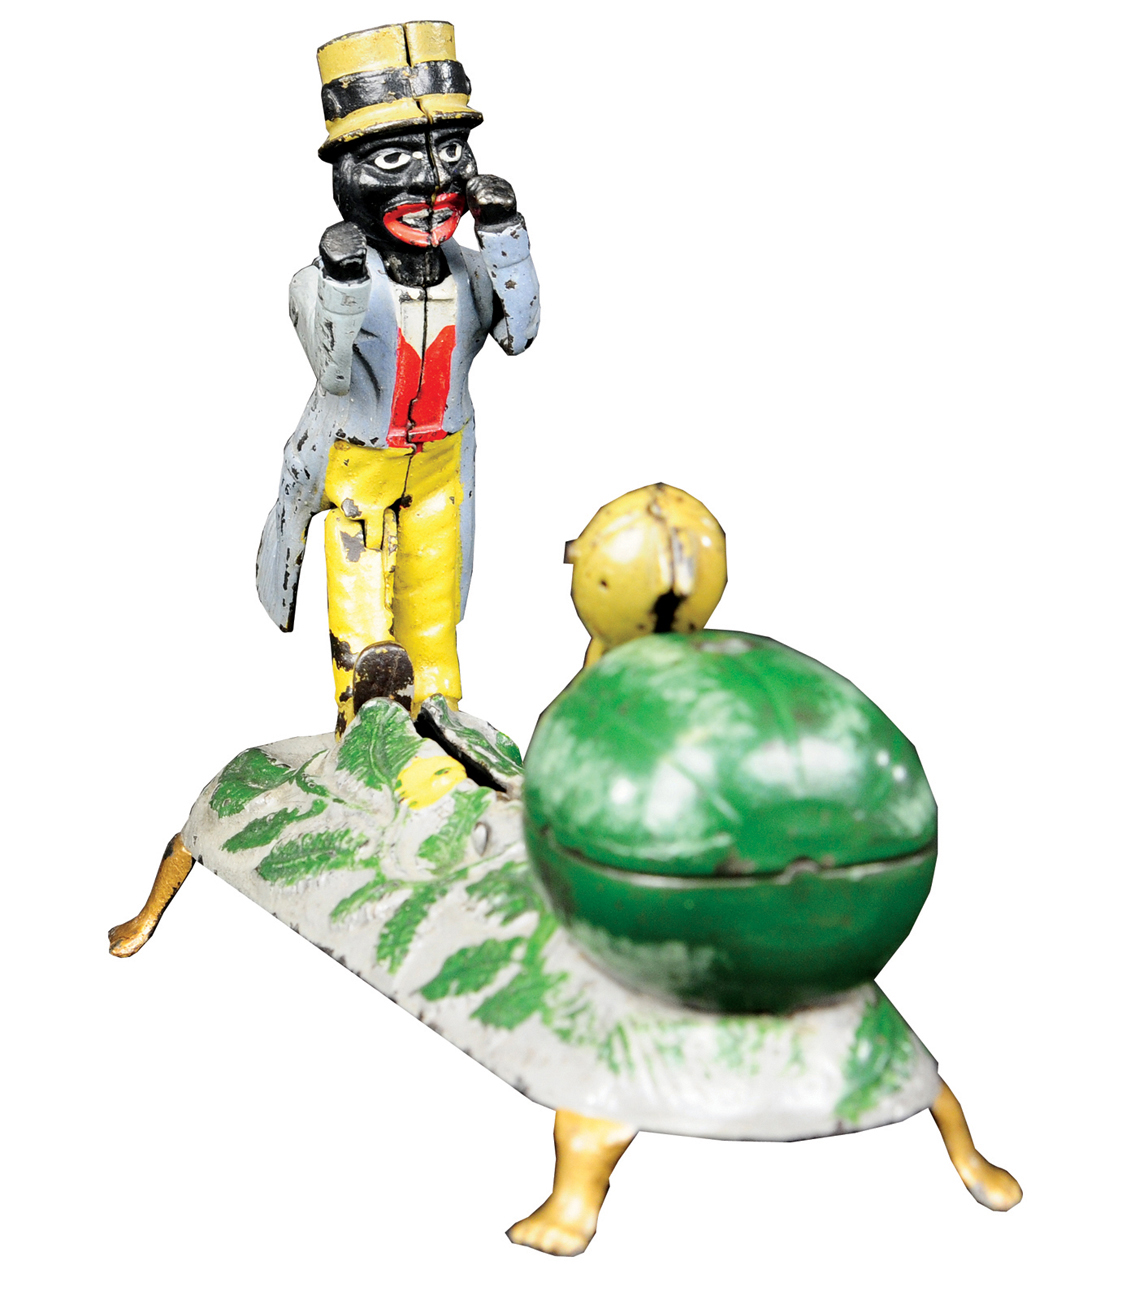 ‘Darky Kicking Watermelon’ mechanical bank, J. & E. Stevens Co., designed by Charles A. Bailey, patented 1888, one of four known examples, provenance: Wally Tudor, F. H. Griffith, Leon Perelman and Stan Sax collections; $270,000. Bertoia Auctions image